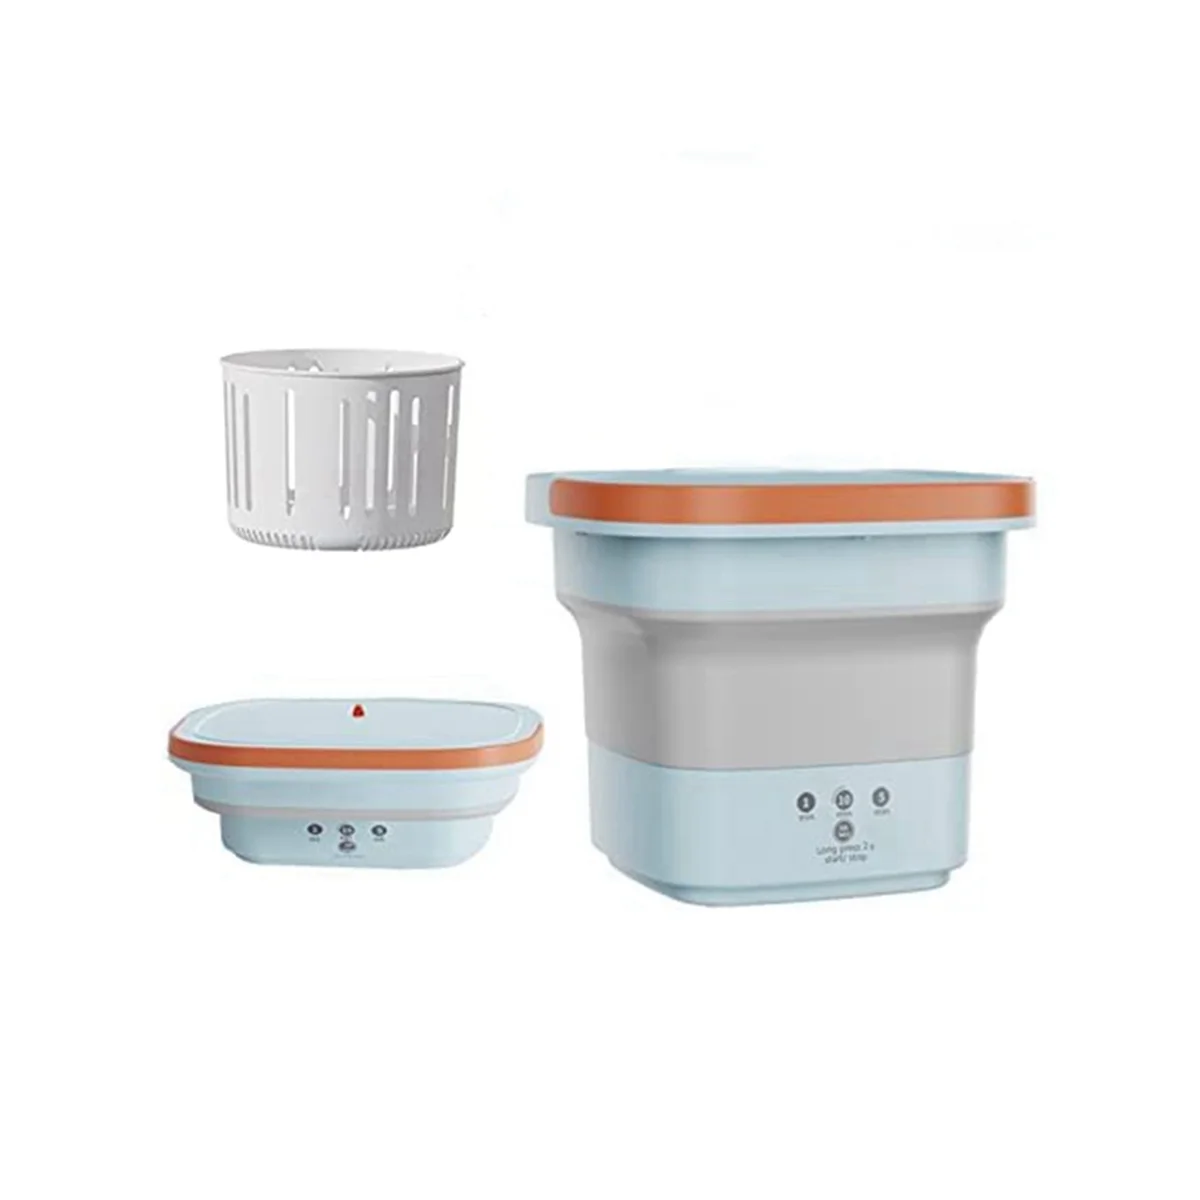  portable turbo washing machine with drain basket for dorms travel gifts for friends or thumb200